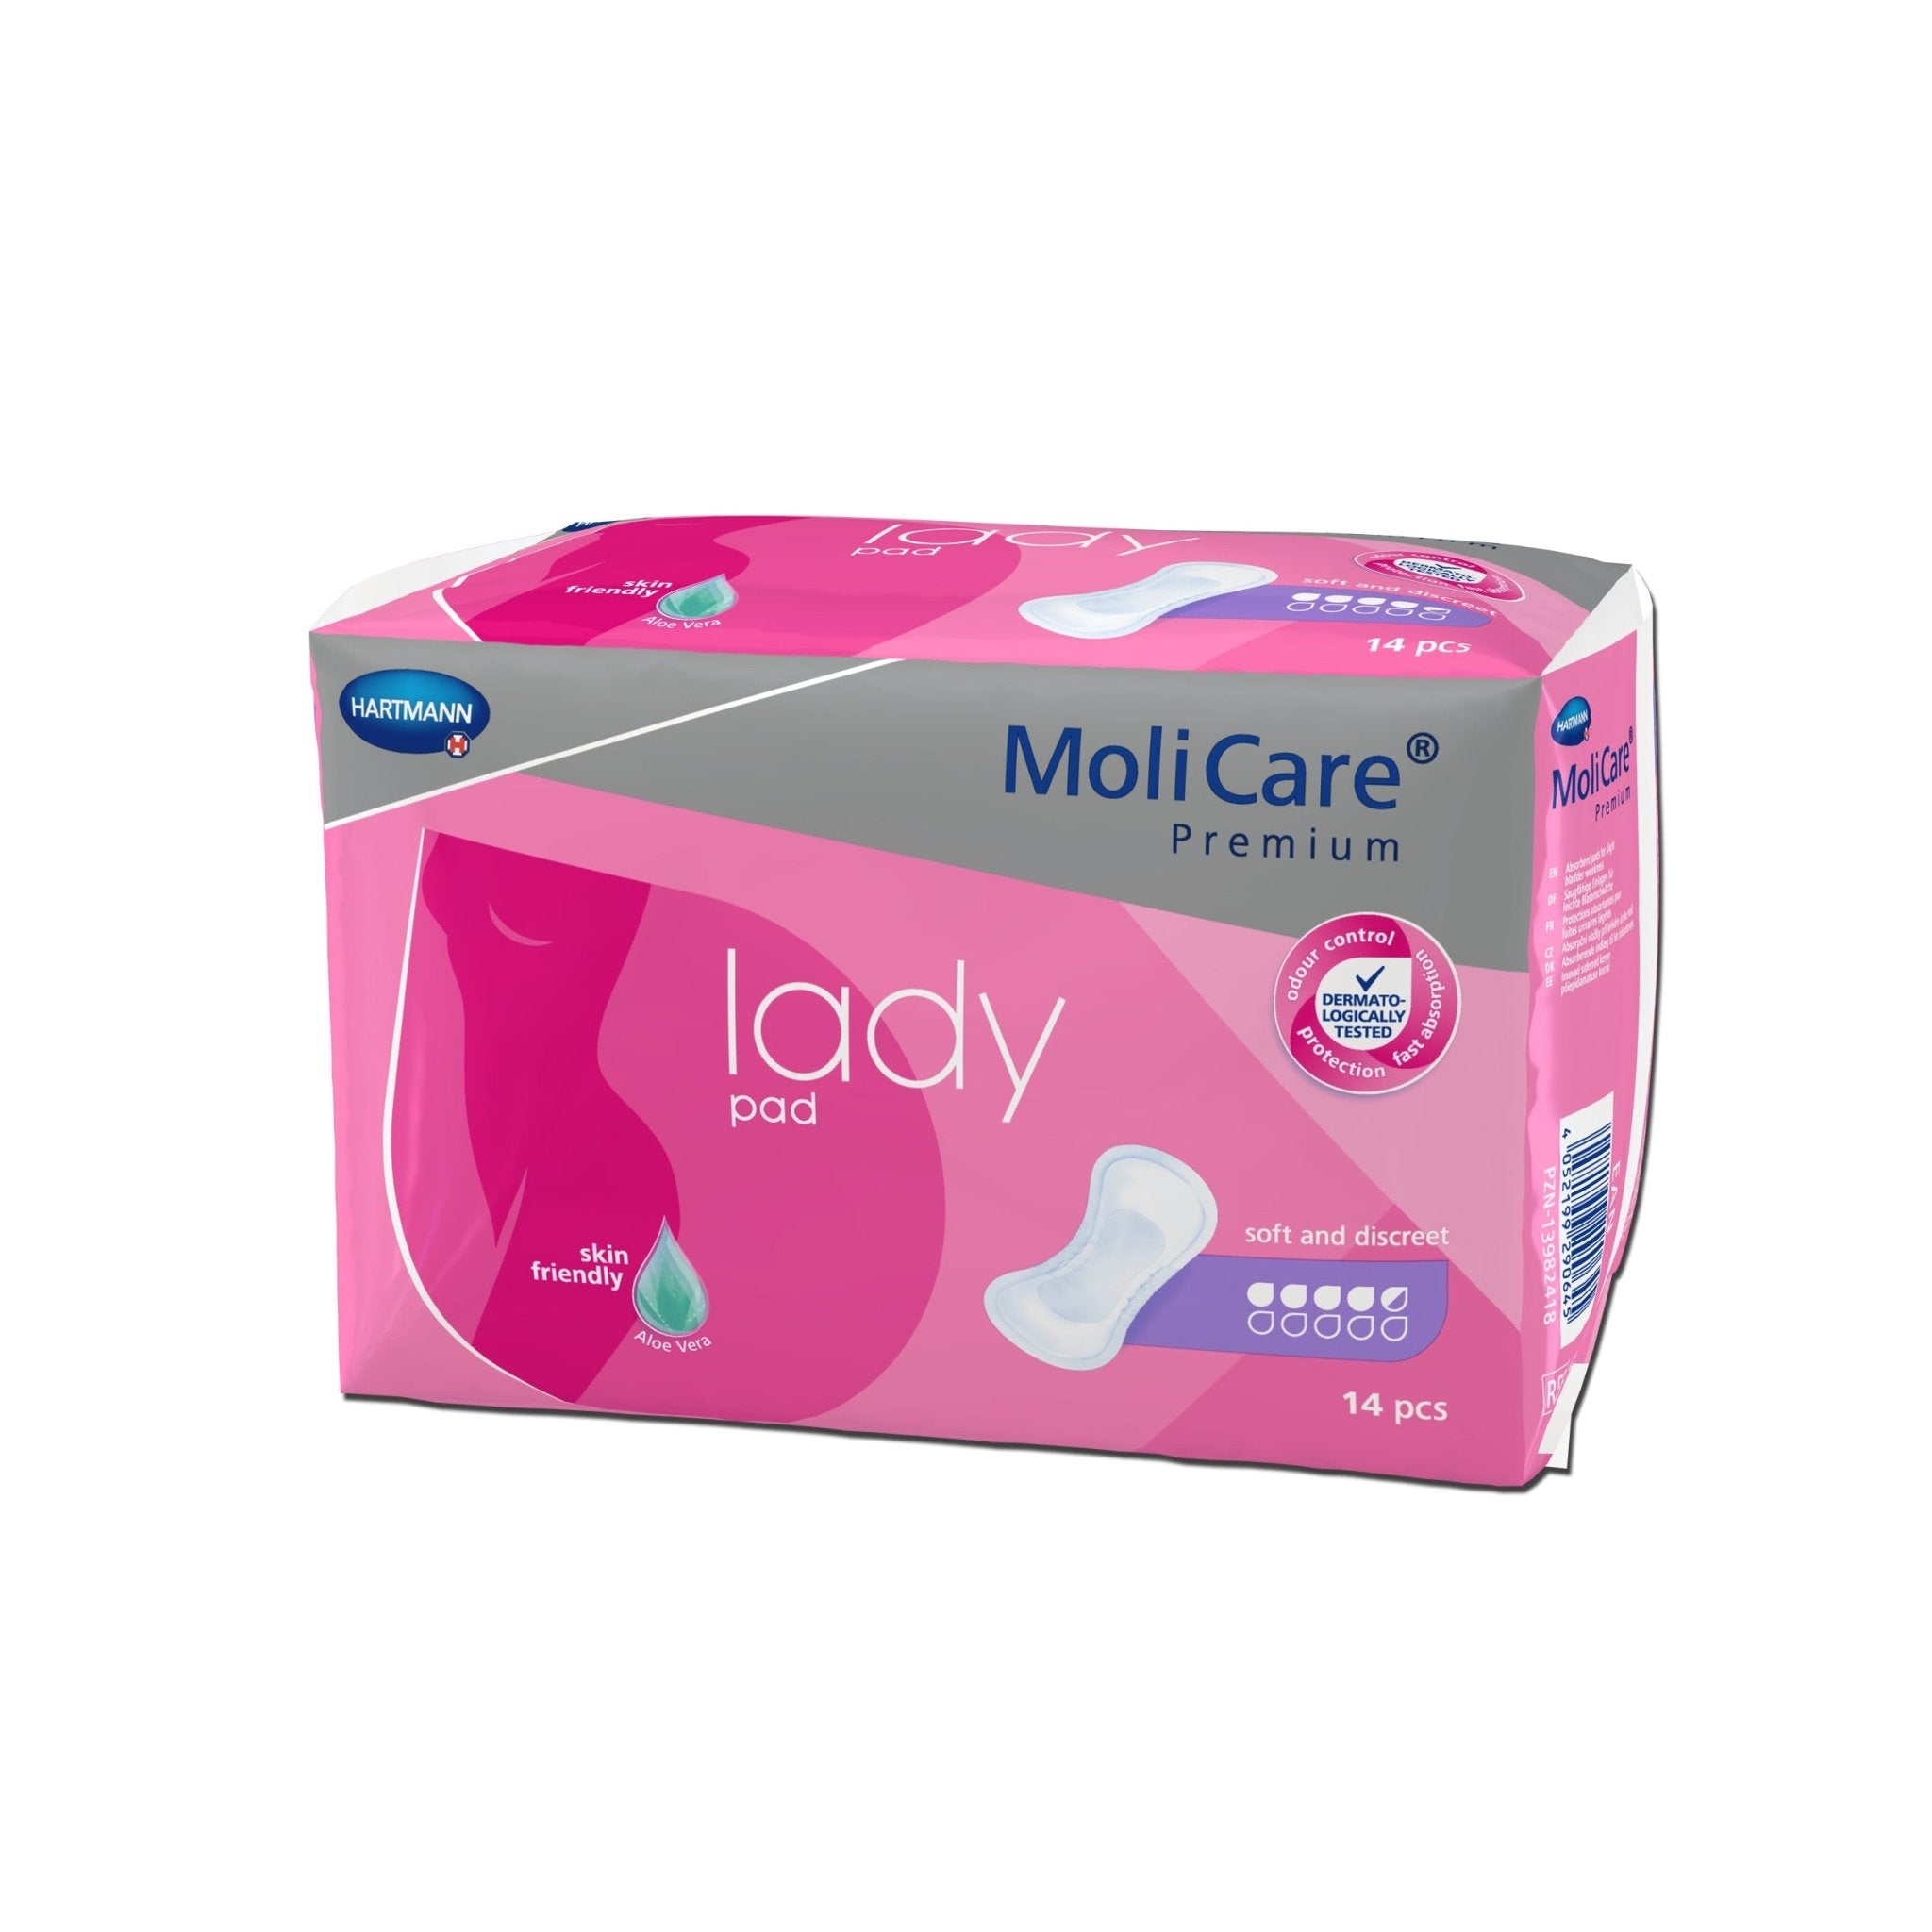 CA/168 - MoliCare Premium Lady Pad, 4.5 Drop Absorbency Level, 17" x 6.5", Non-woven, Latex-free. - Best Buy Medical Supplies